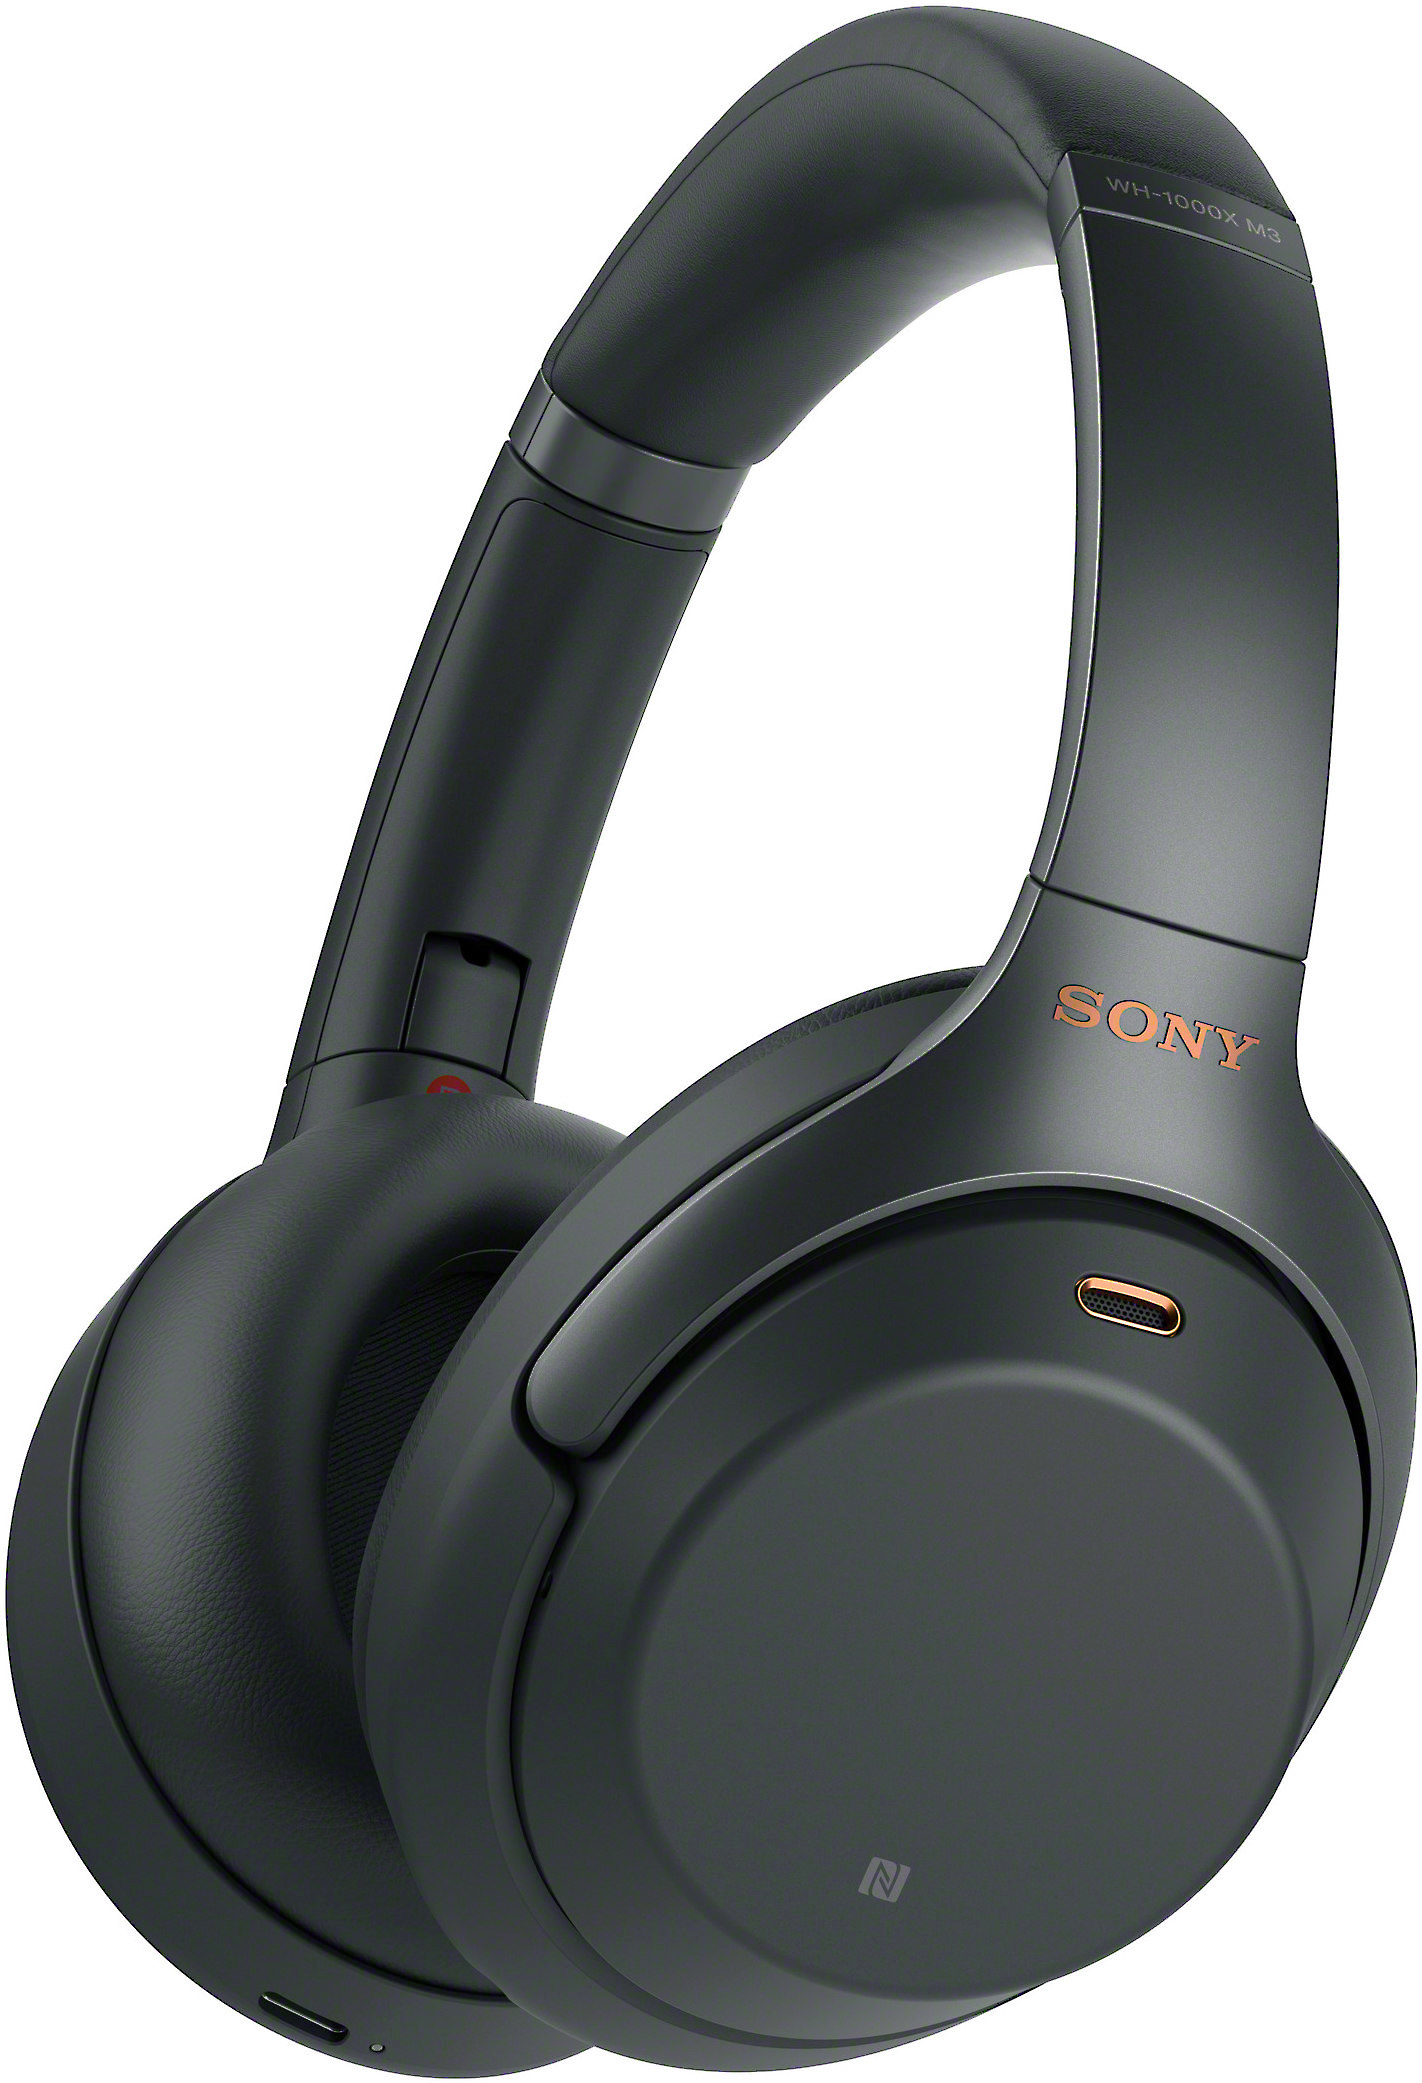 Sony WH-1000XM3 (Black) Over-ear Bluetooth® wireless noise-canceling  headphones at Crutchfield